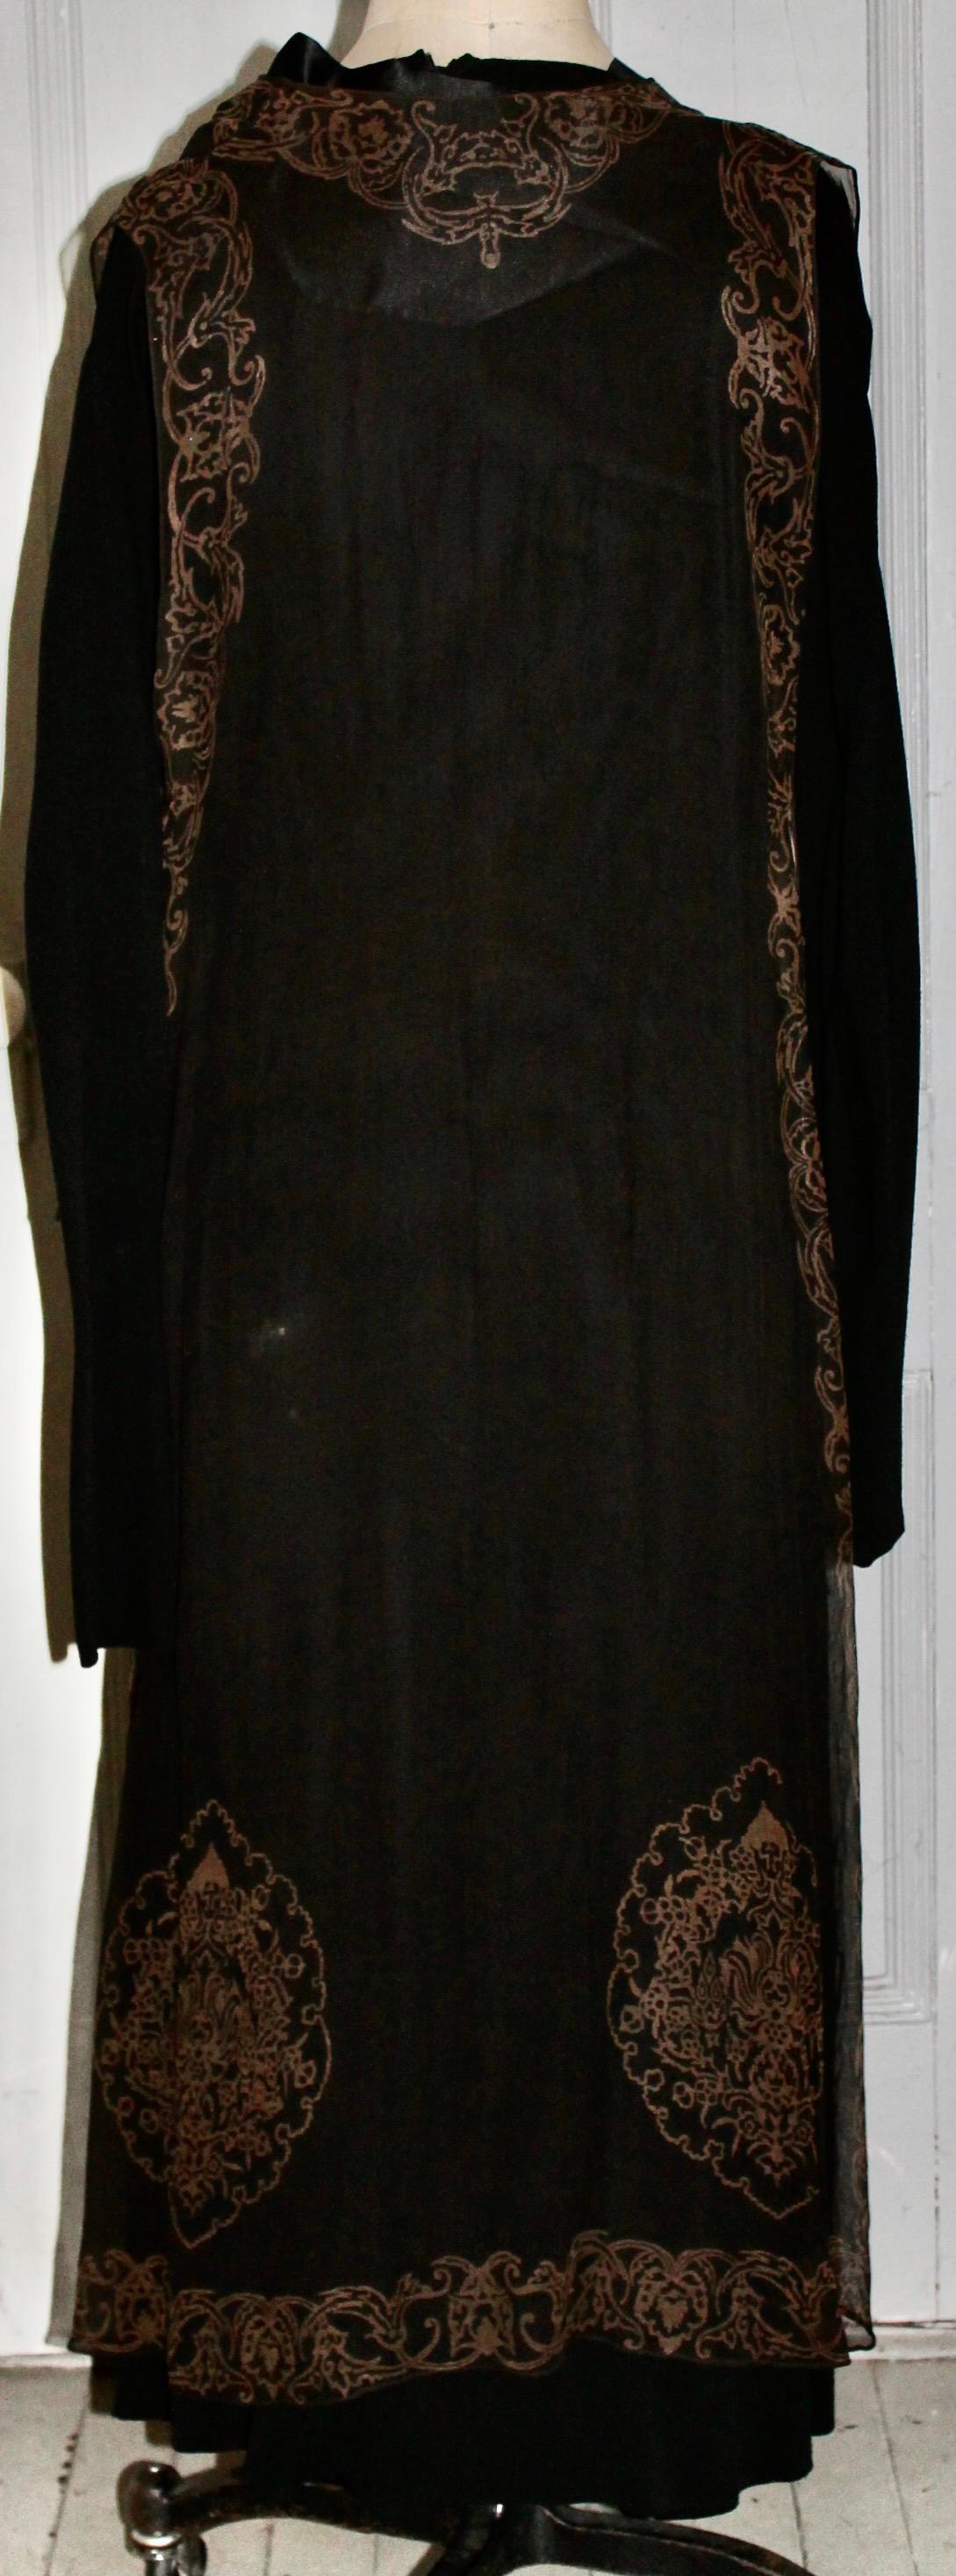 Mariano Fortuny Gauze Sleeveless Coat Vest In Good Condition For Sale In Sharon, CT